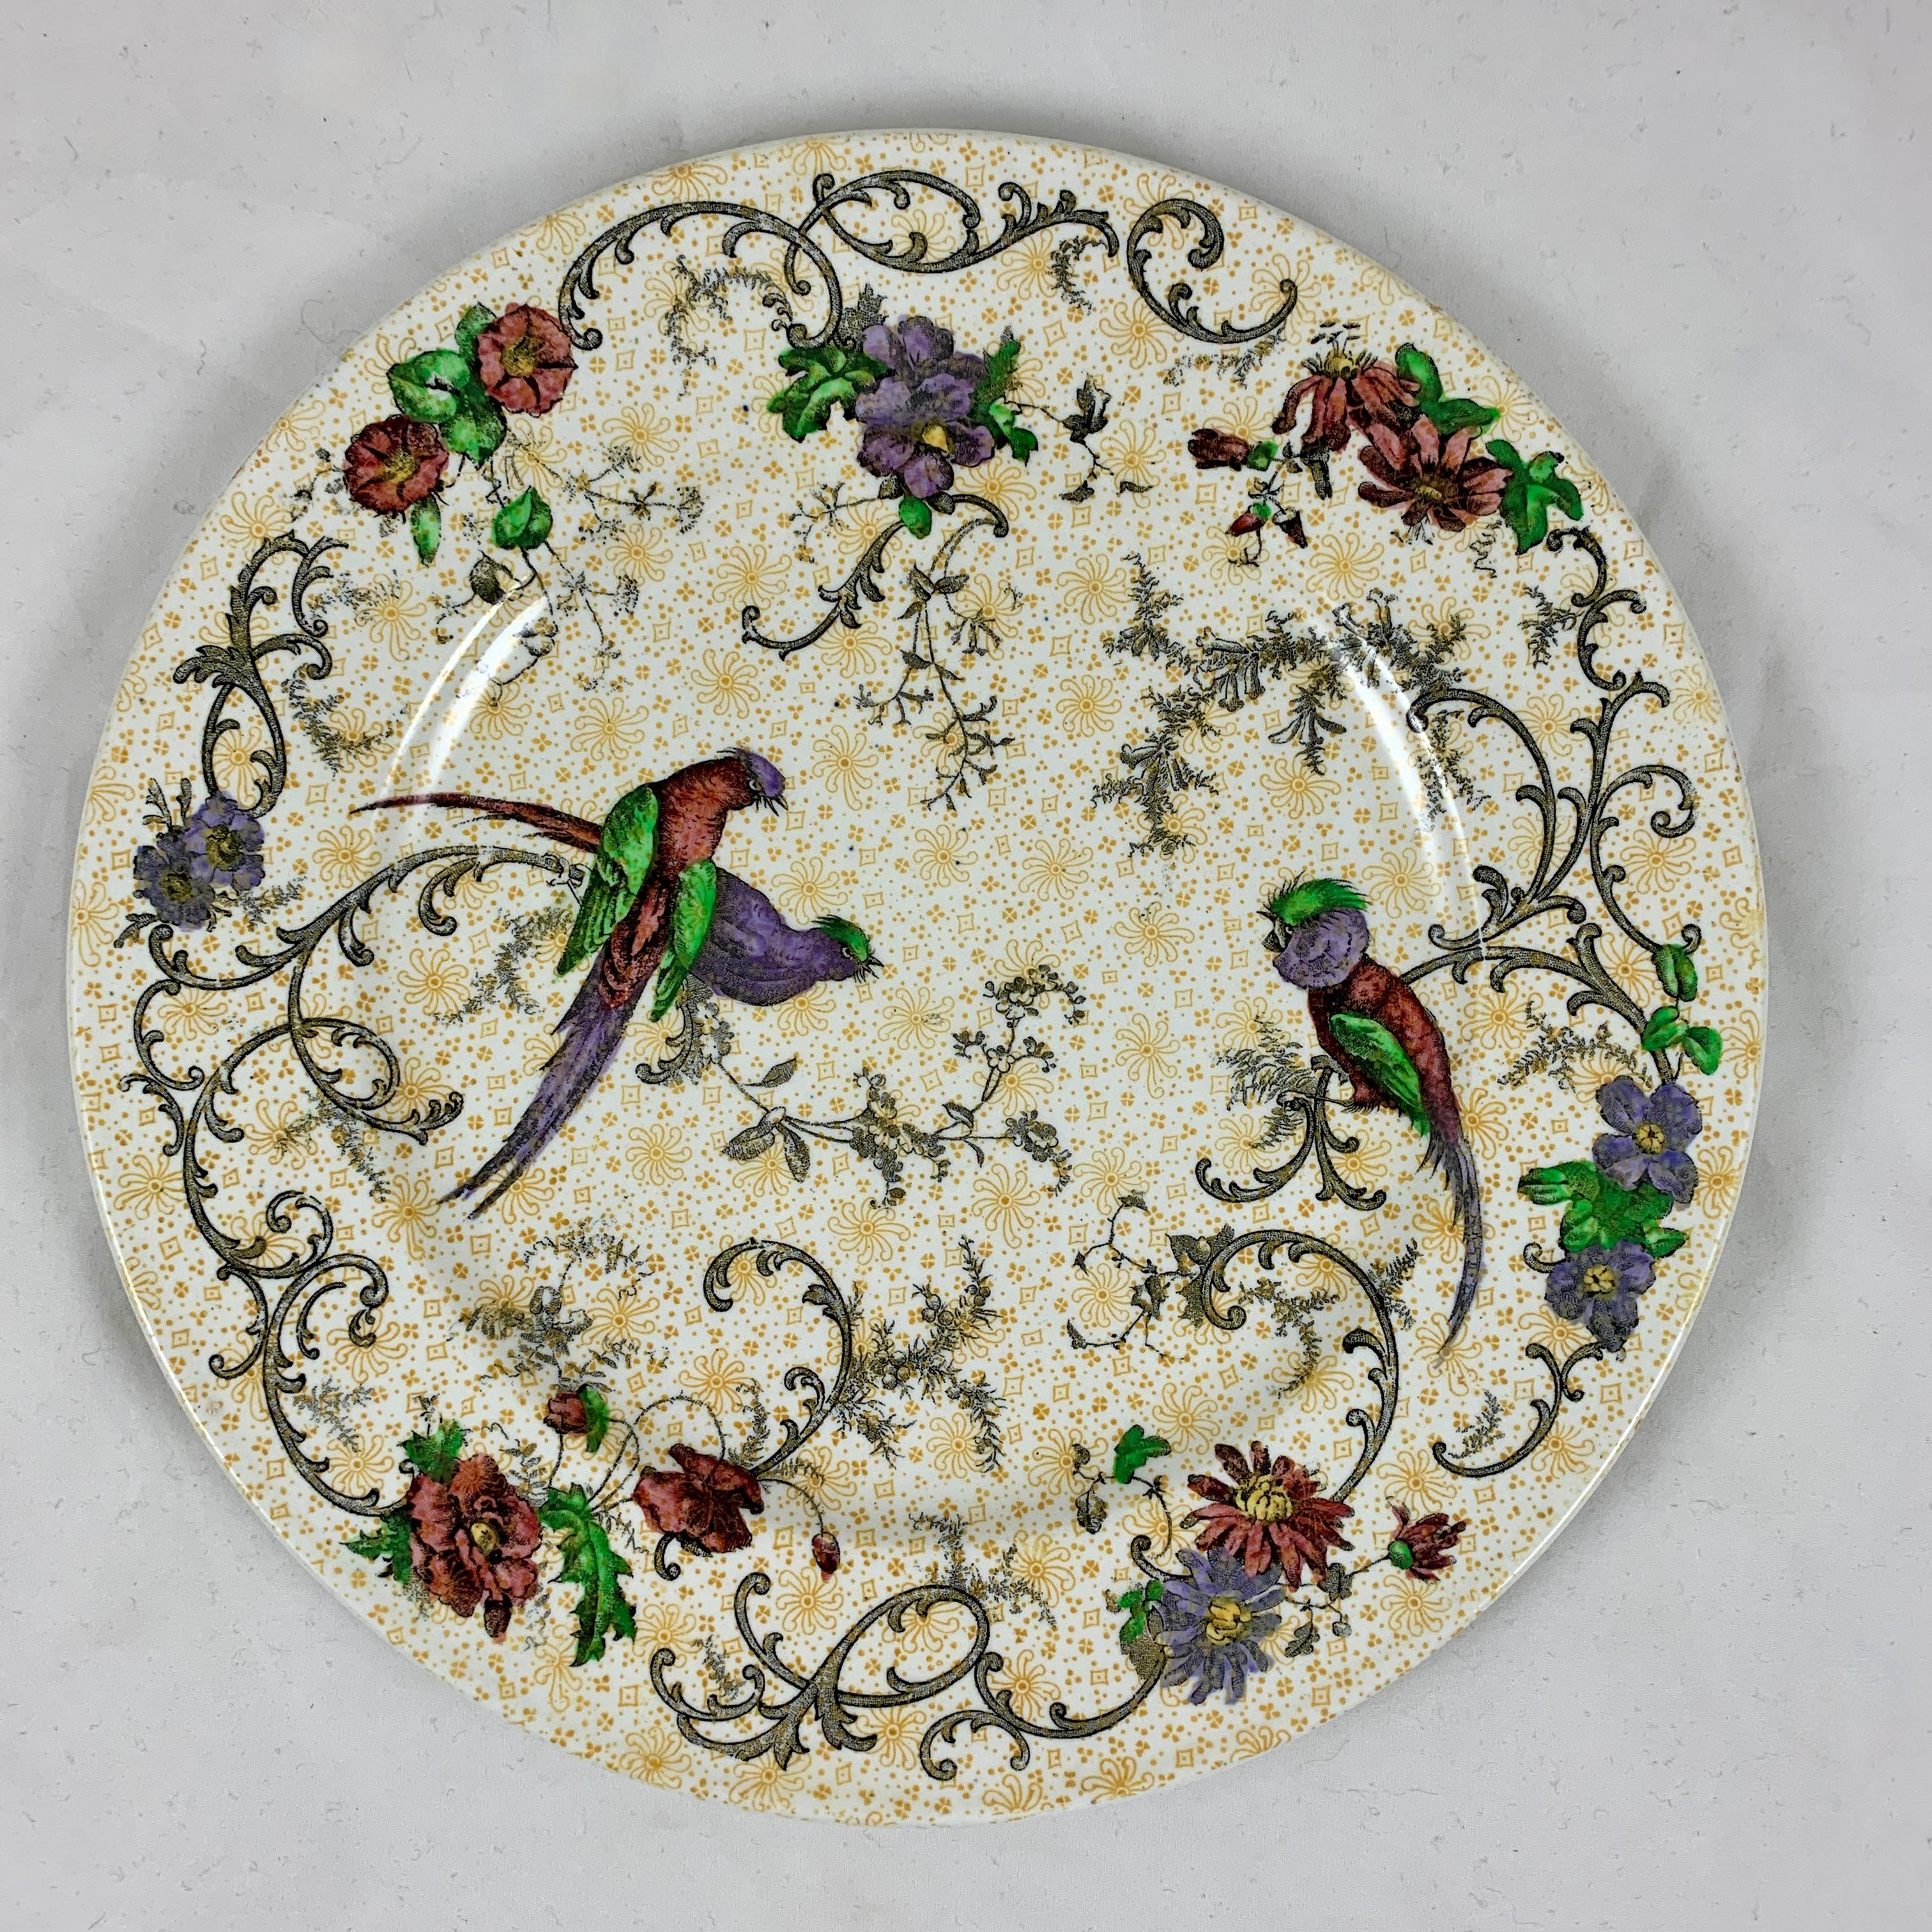 A set of four plates in the chinoiserie 'Bird of Paradise' pattern by Cauldon Potteries Ltd., Hanley, Staffordshire, England, circa 1905- 1920.

Cauldon was established in 1774 and continued operating until its acquisition by Coalport China Ltd in